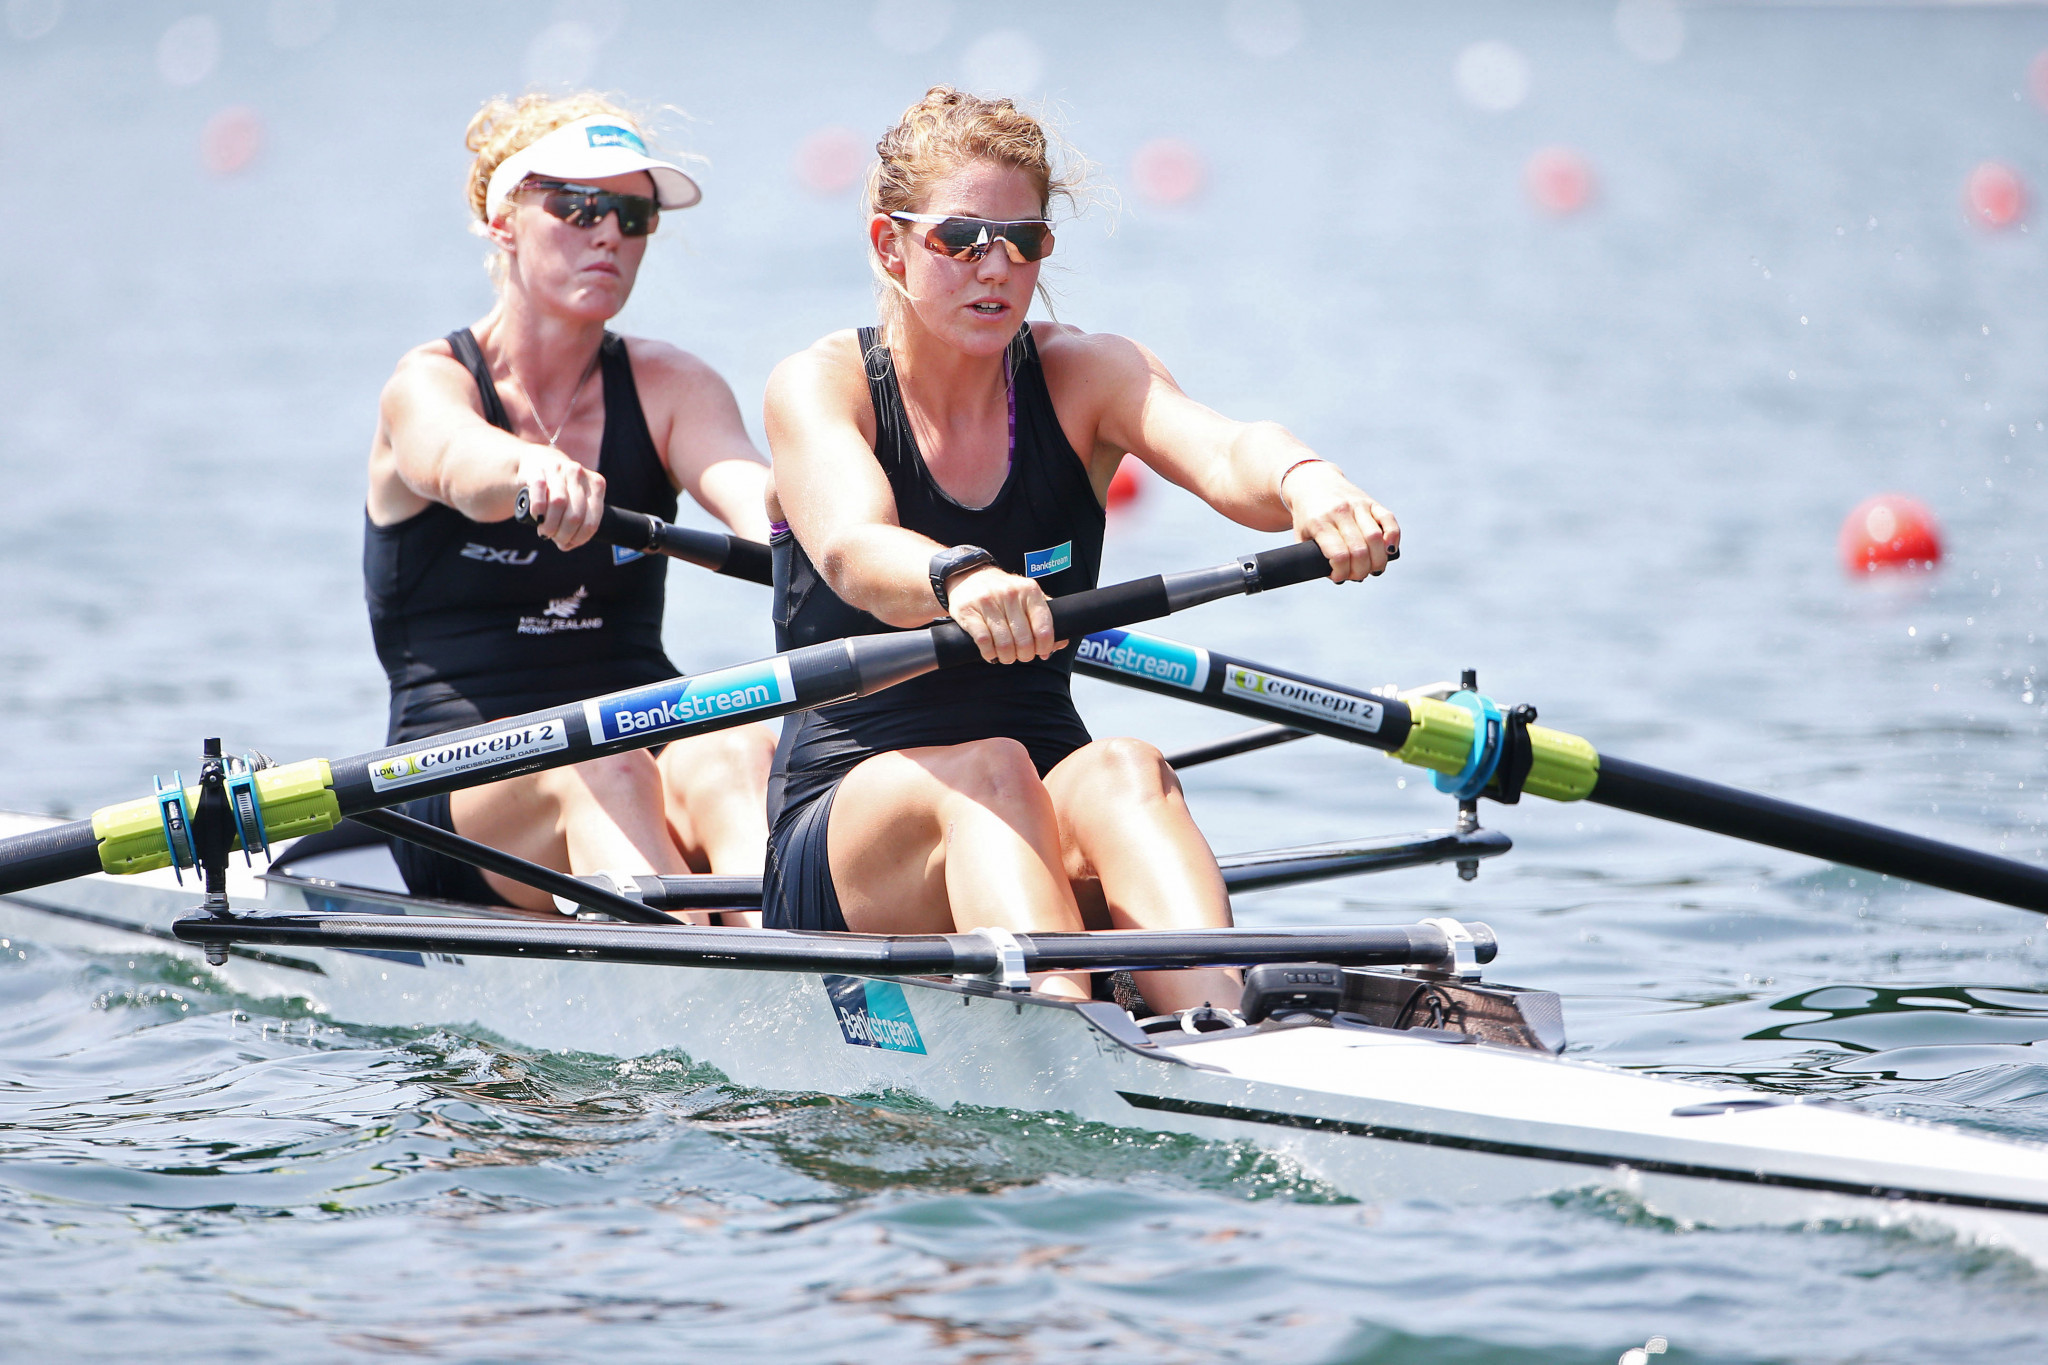 World champions ease through on opening day of World Rowing Cup in Lucerne